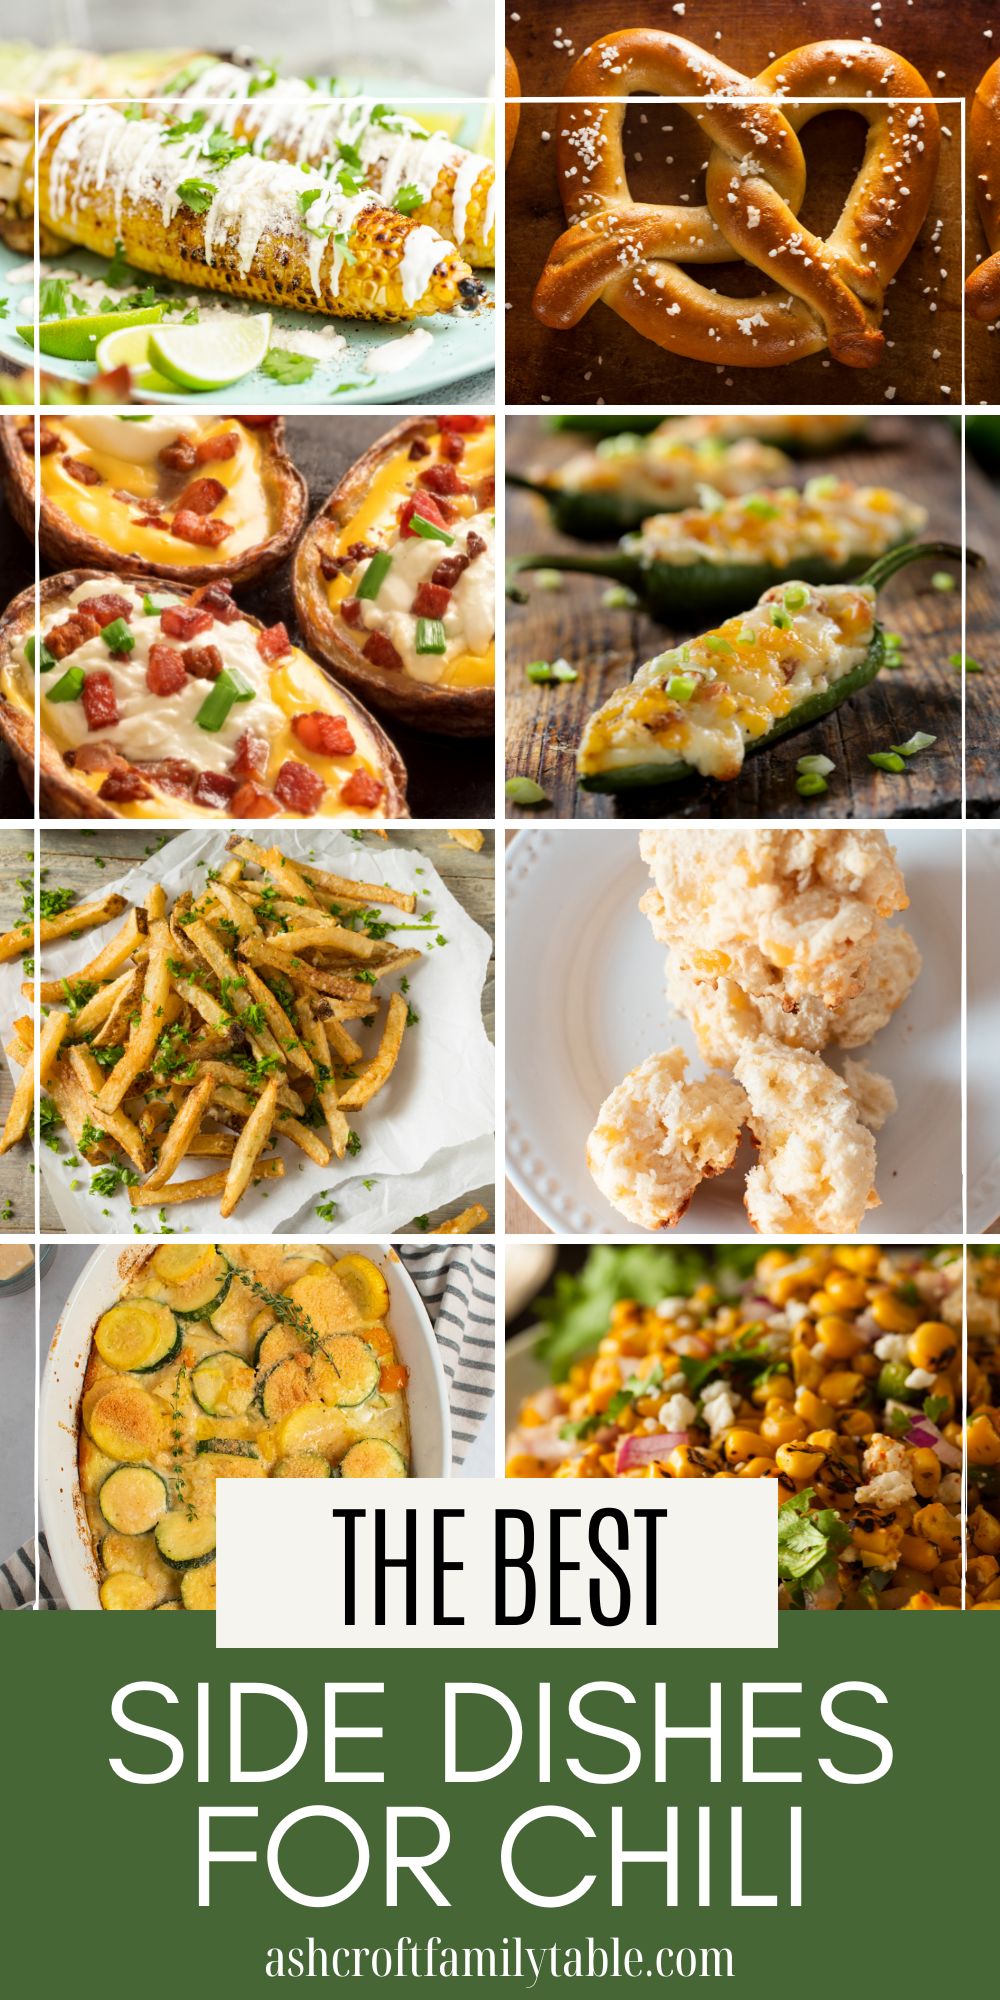 Pinterest graphic with text and collage of side dishes to serve with chili.